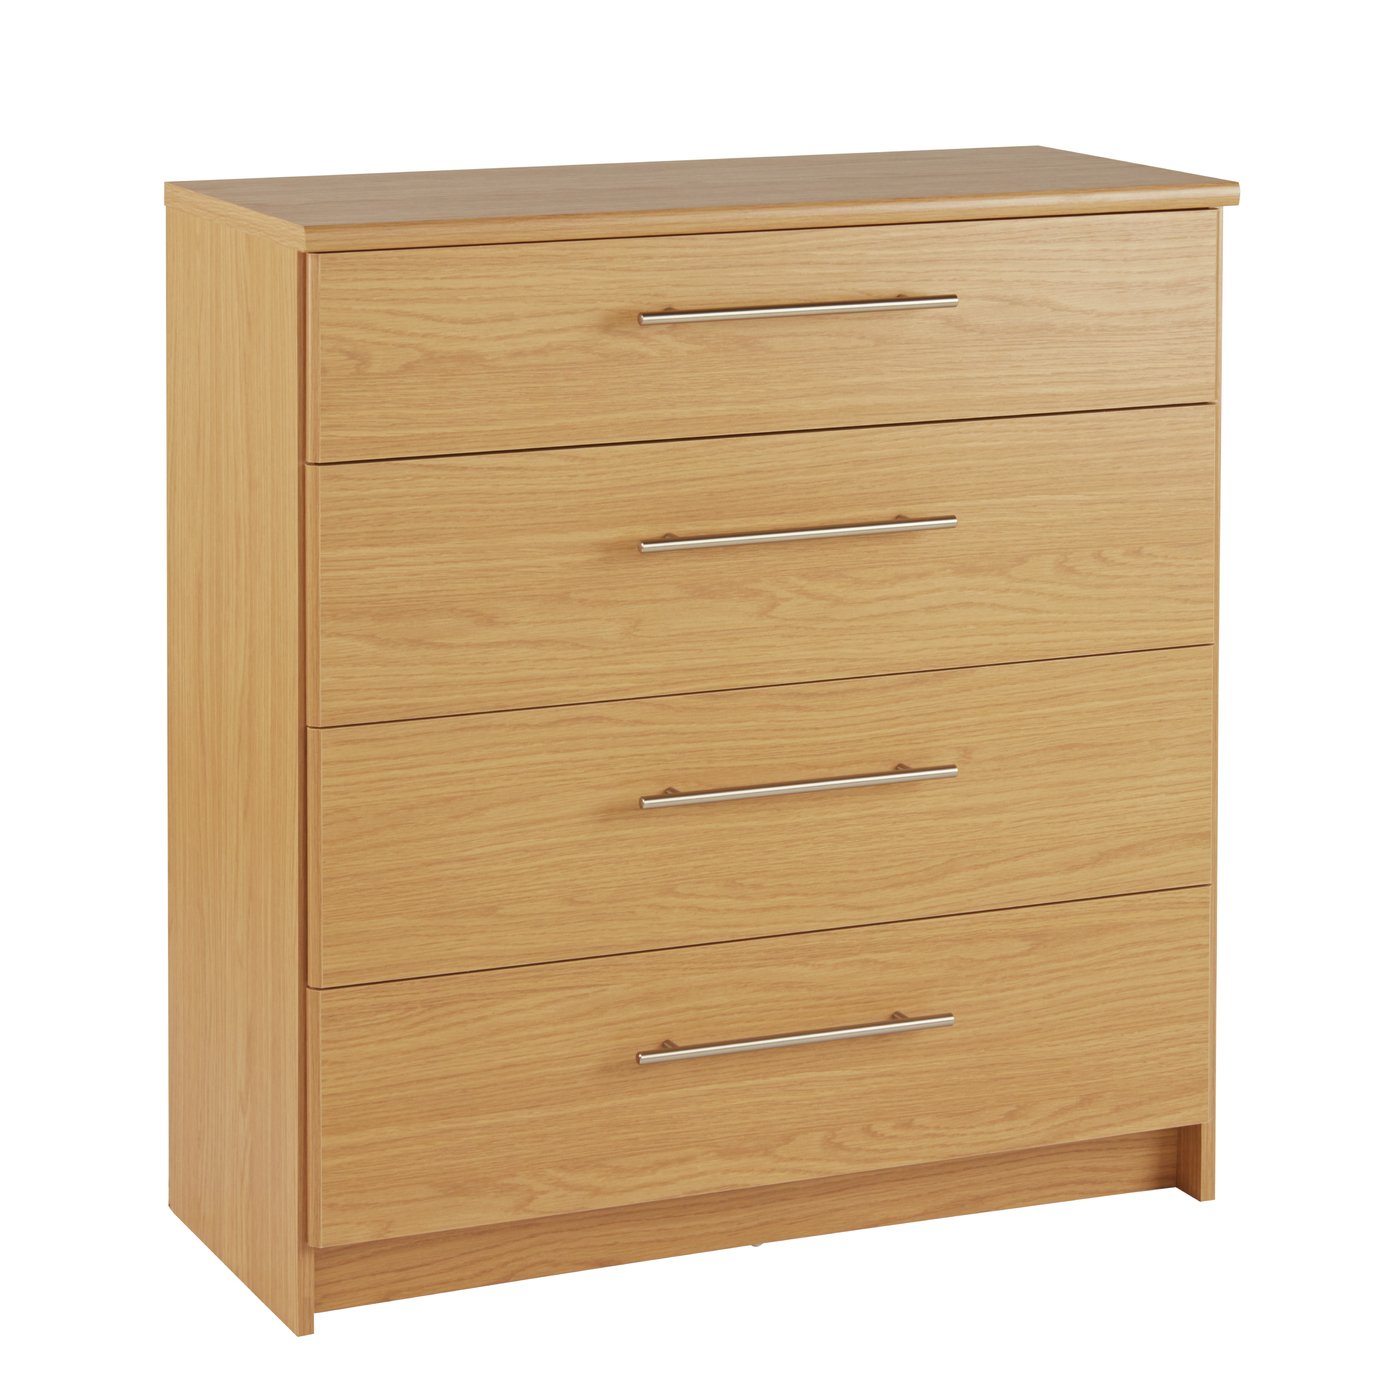 Argos Home Normandy Oak Extra Large 4 Drawer Chest review